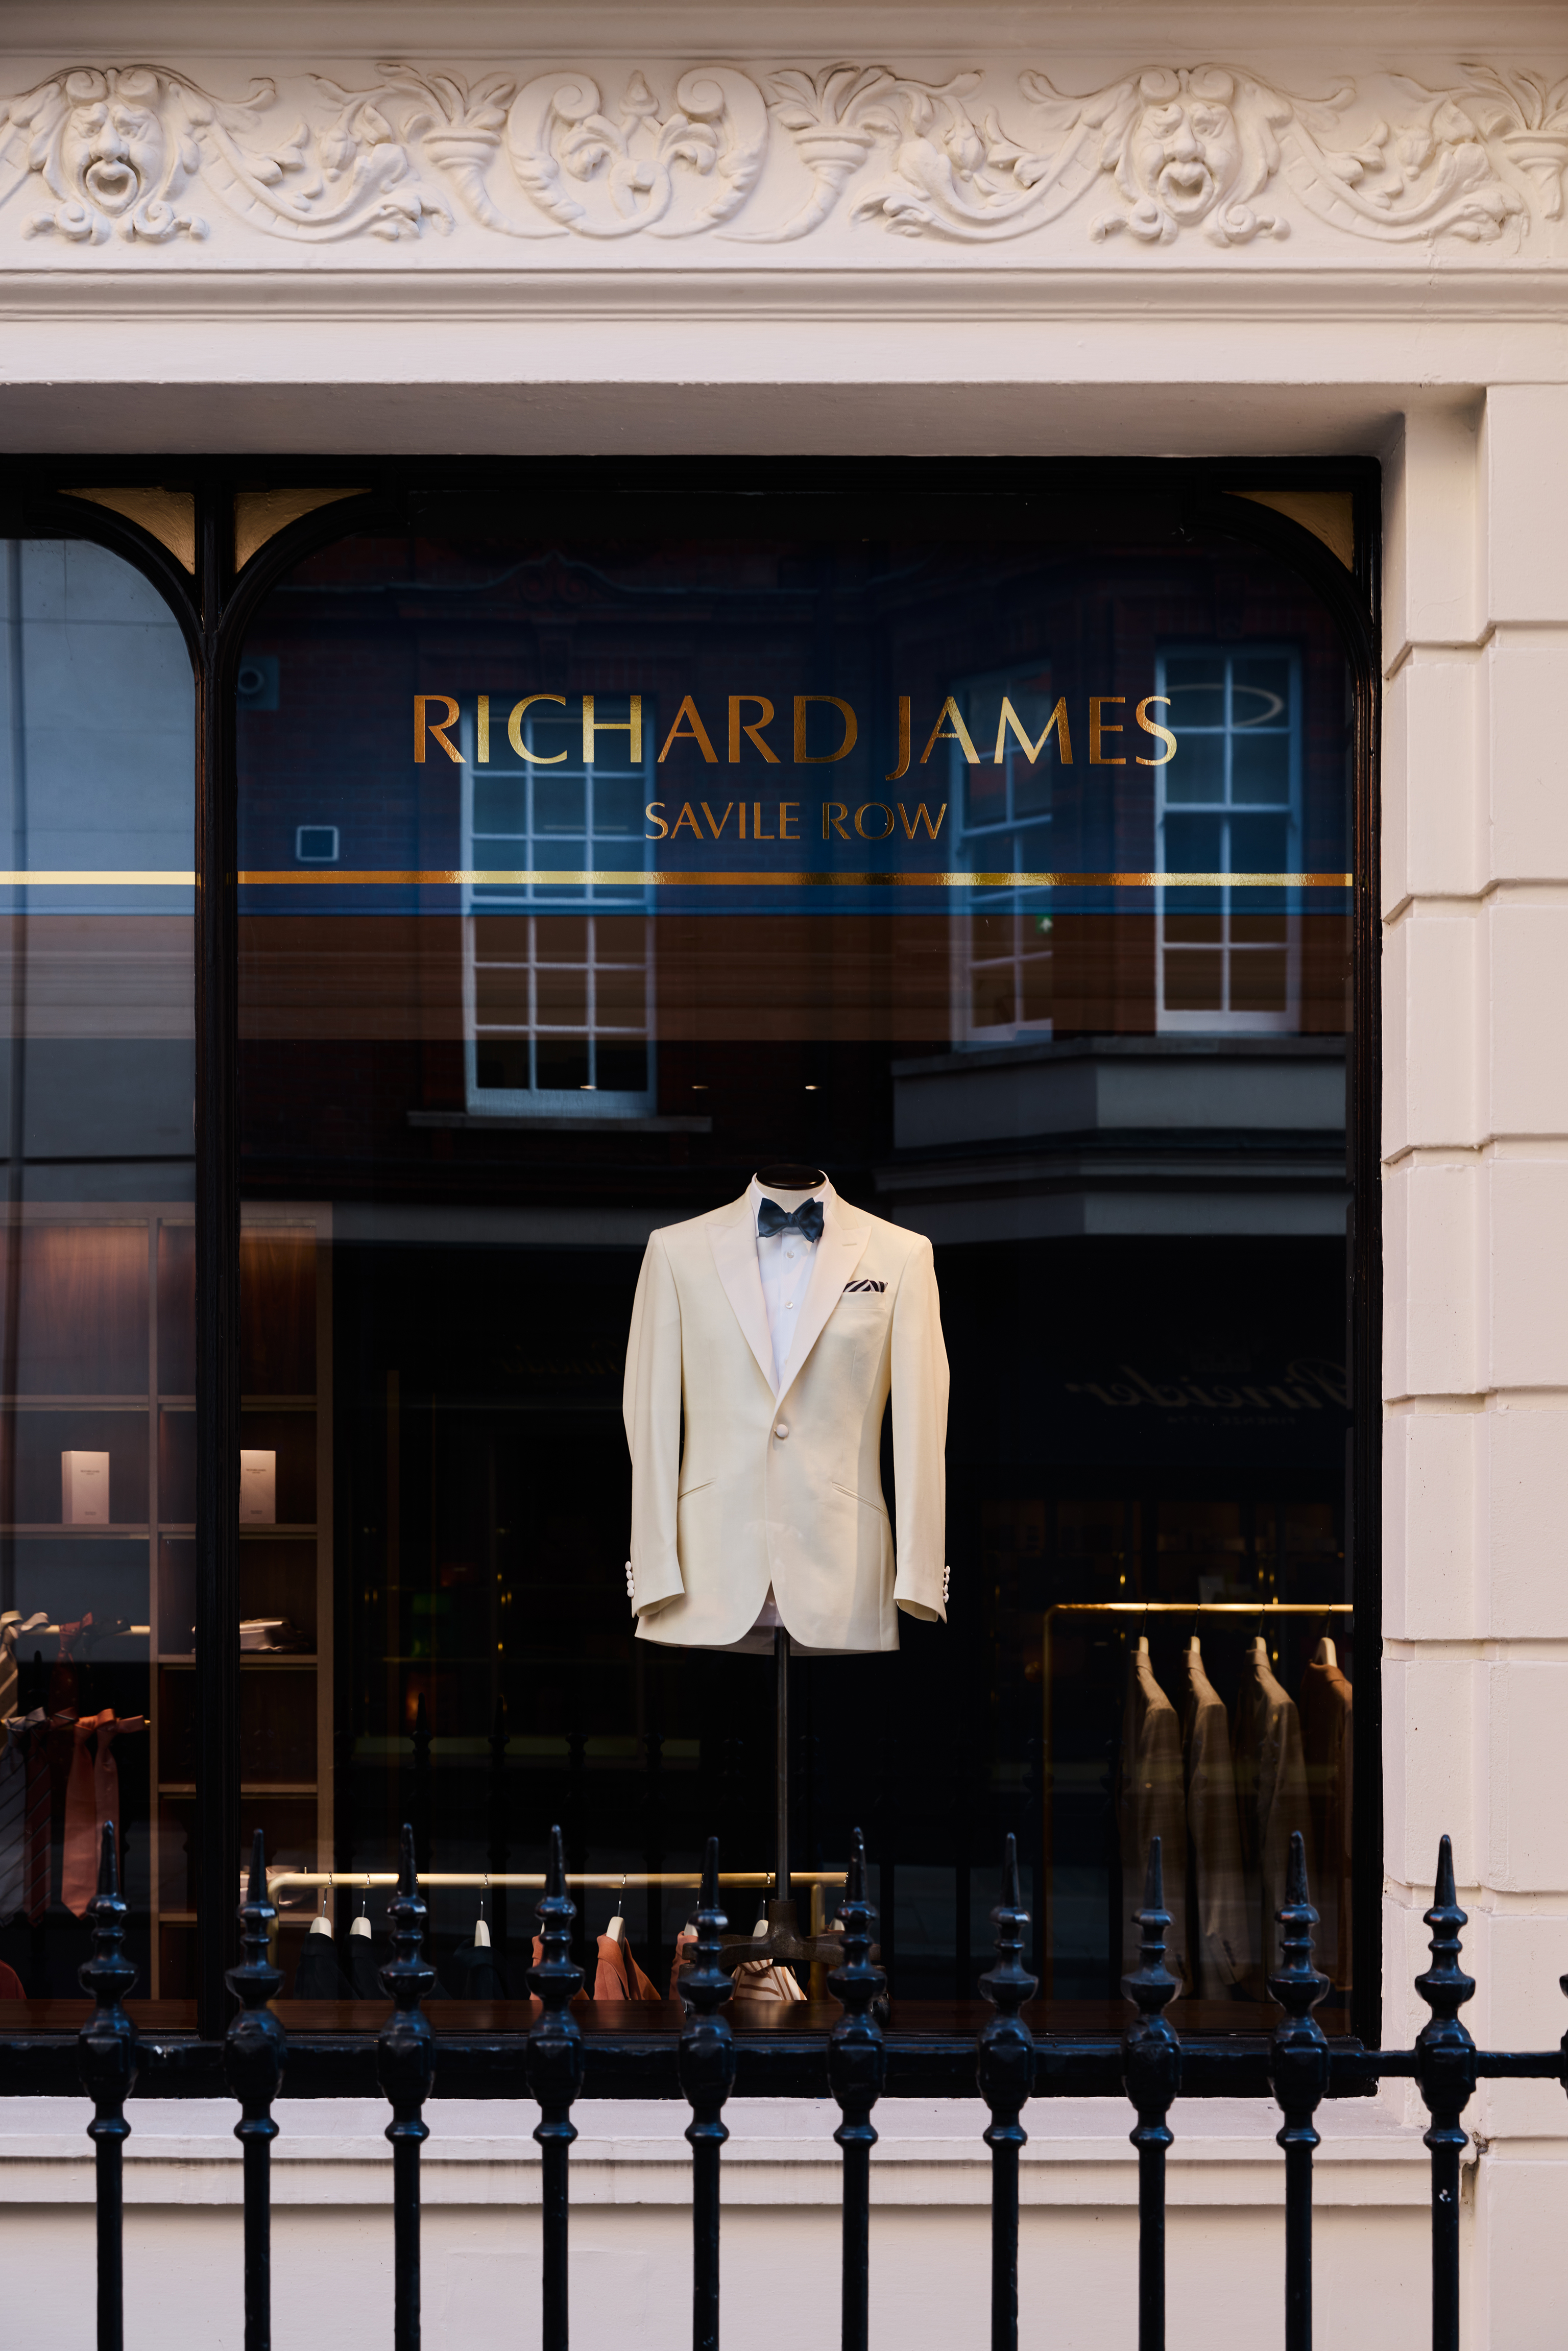 Richard James caused a stir when it opened on Savile Row